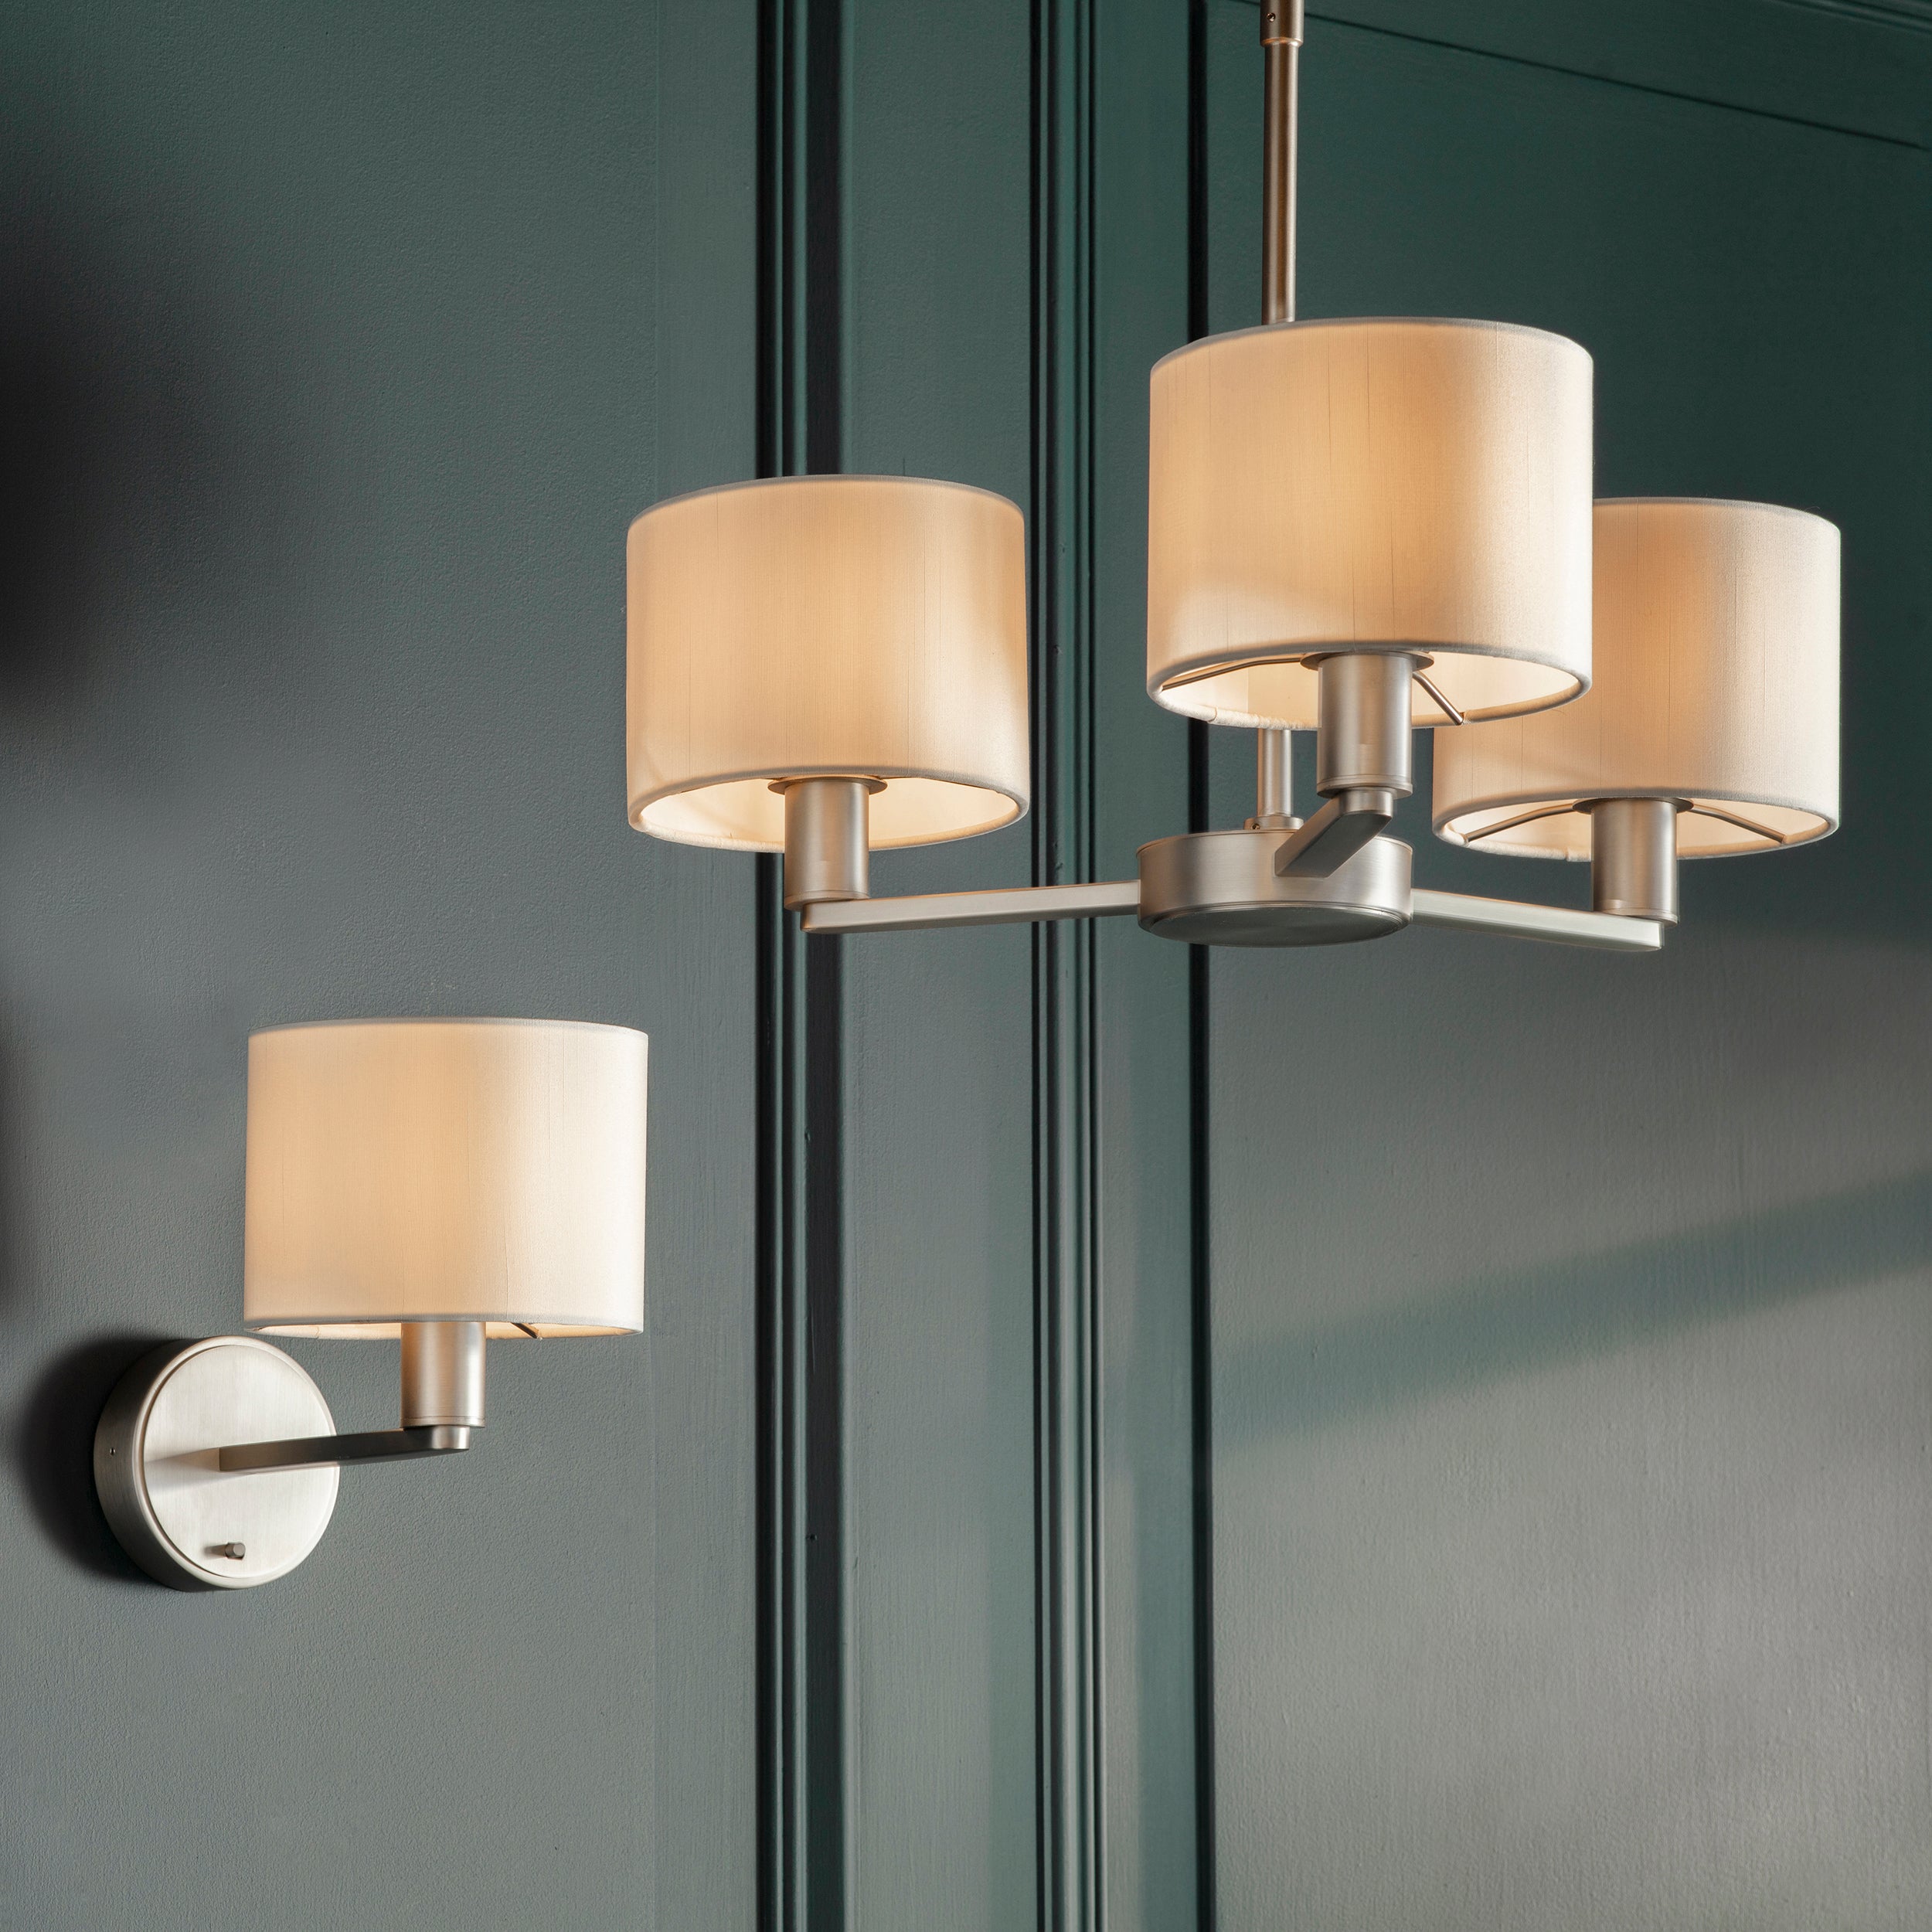 Daley 3 Light Pendant. Nickel With Vintage White Shades